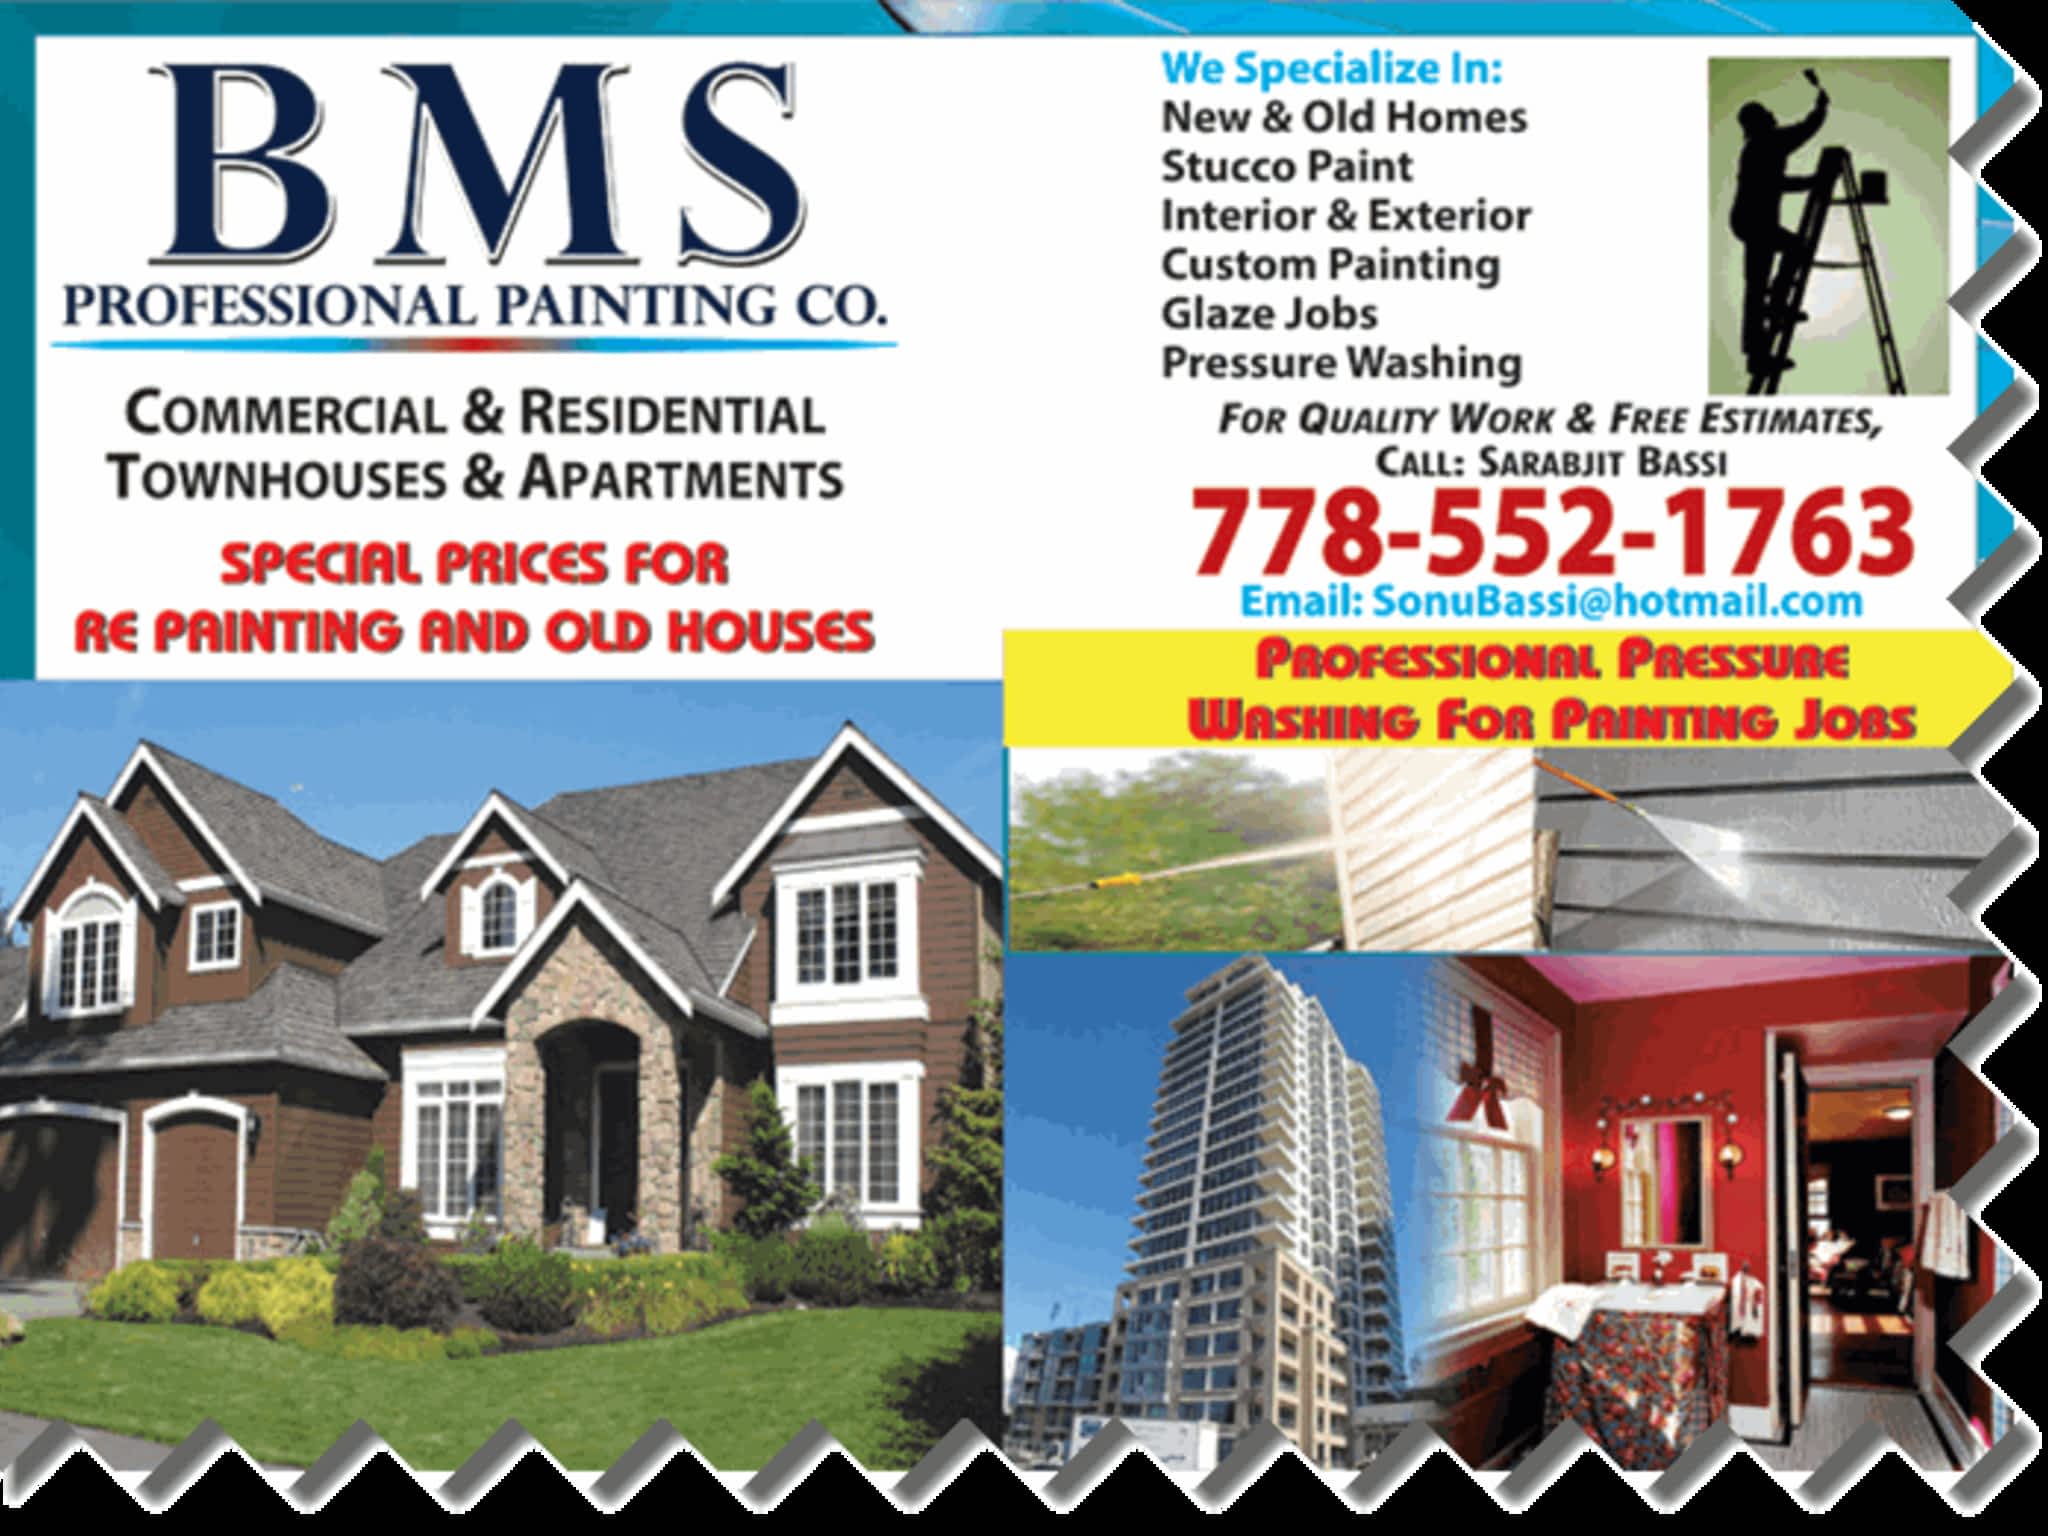 photo BMS Professional Painting Co